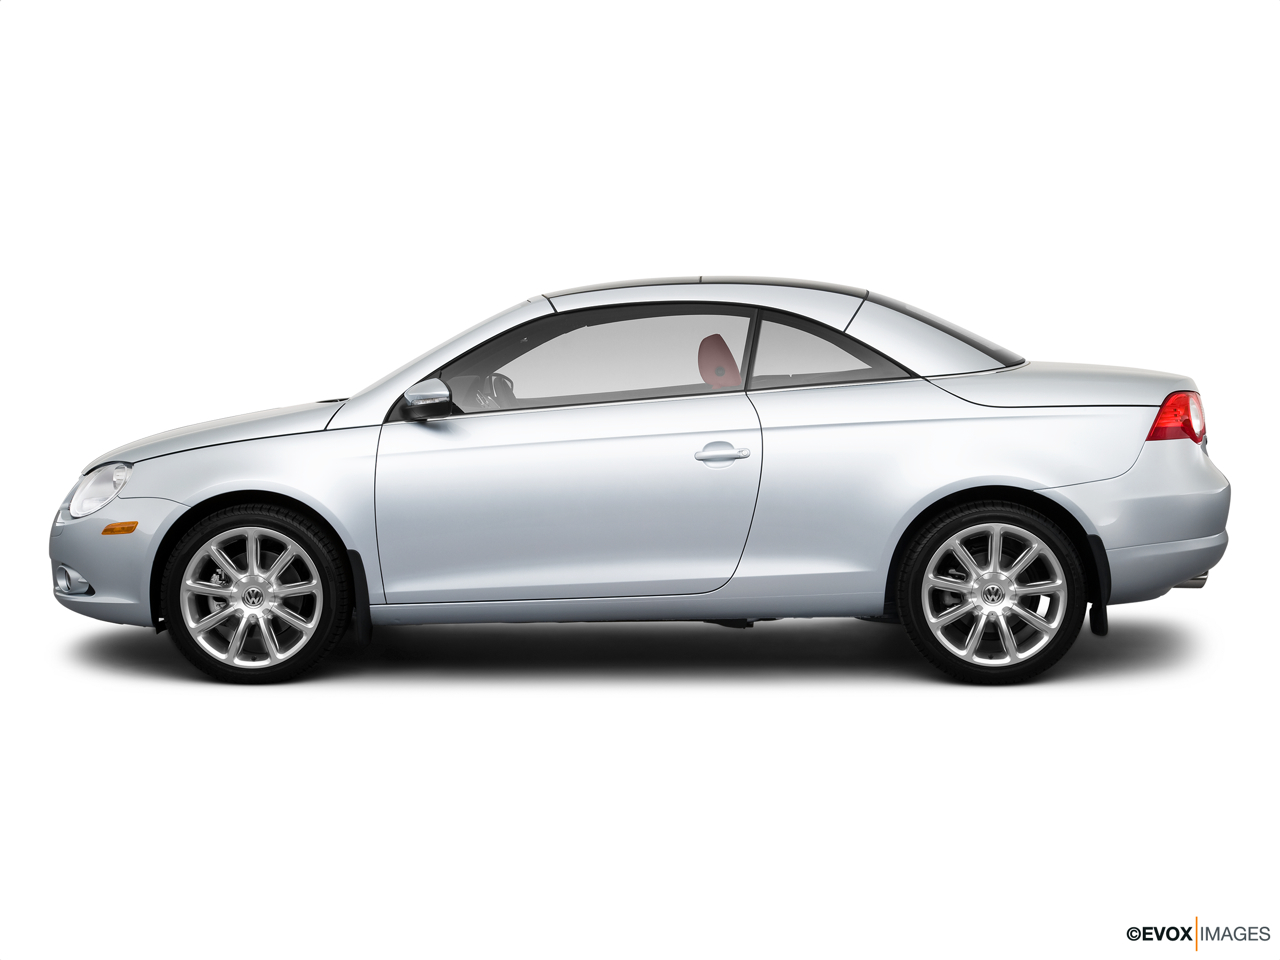 2010 Volkswagen Eos Lux Drivers side profile, convertible top up (convertibles only). 